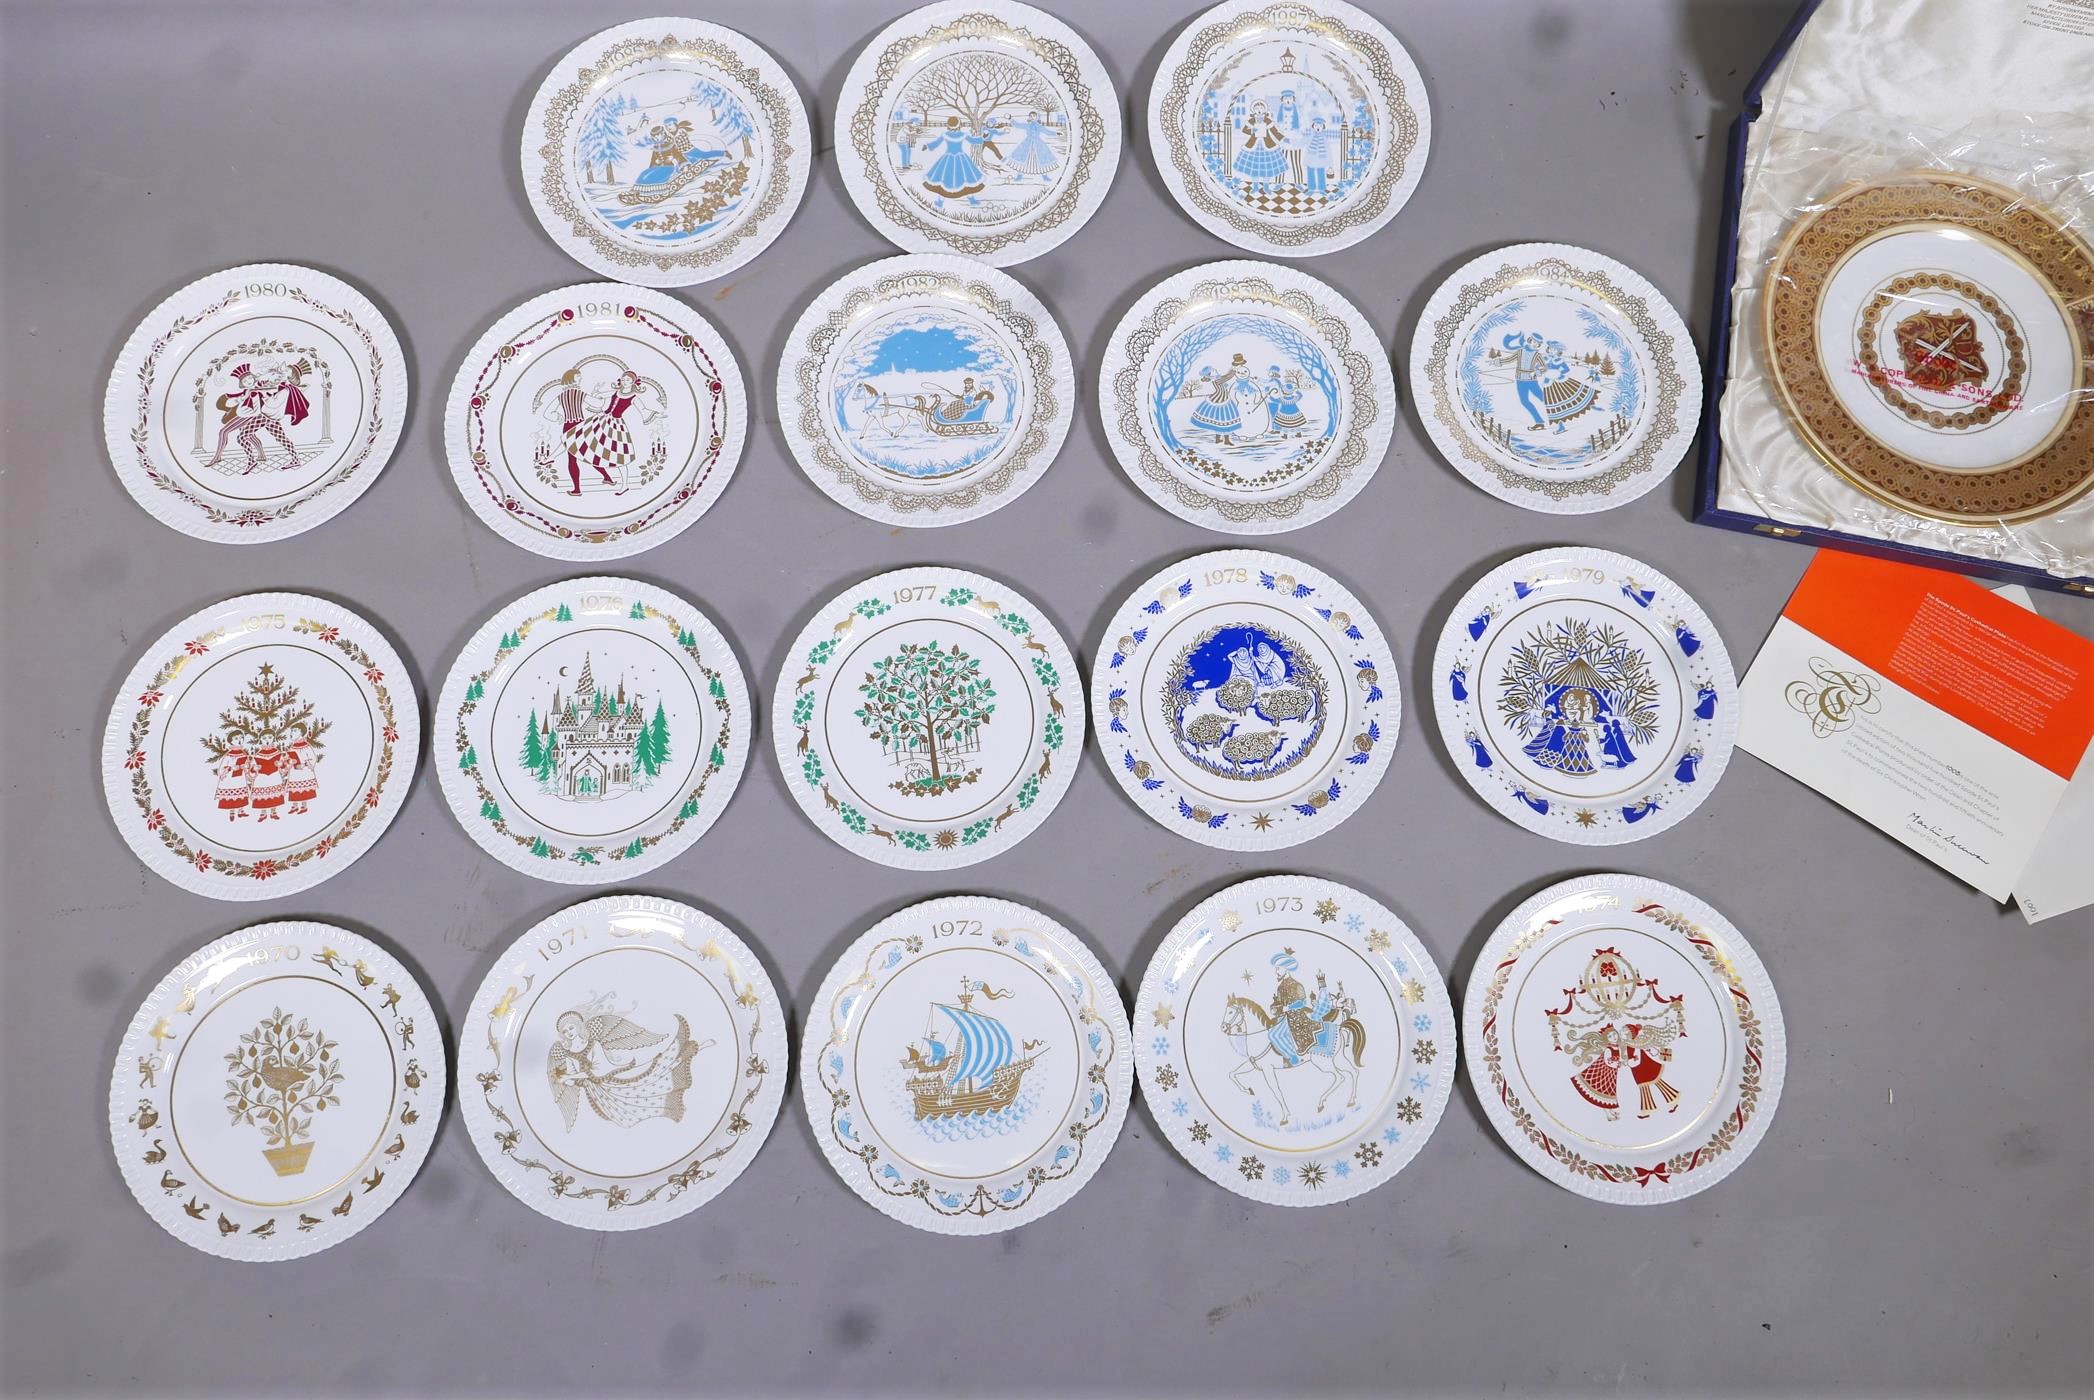 A set of Spode Christmas plates, from the First, 1970 to 1987, and a Spode limited edition St Paul's